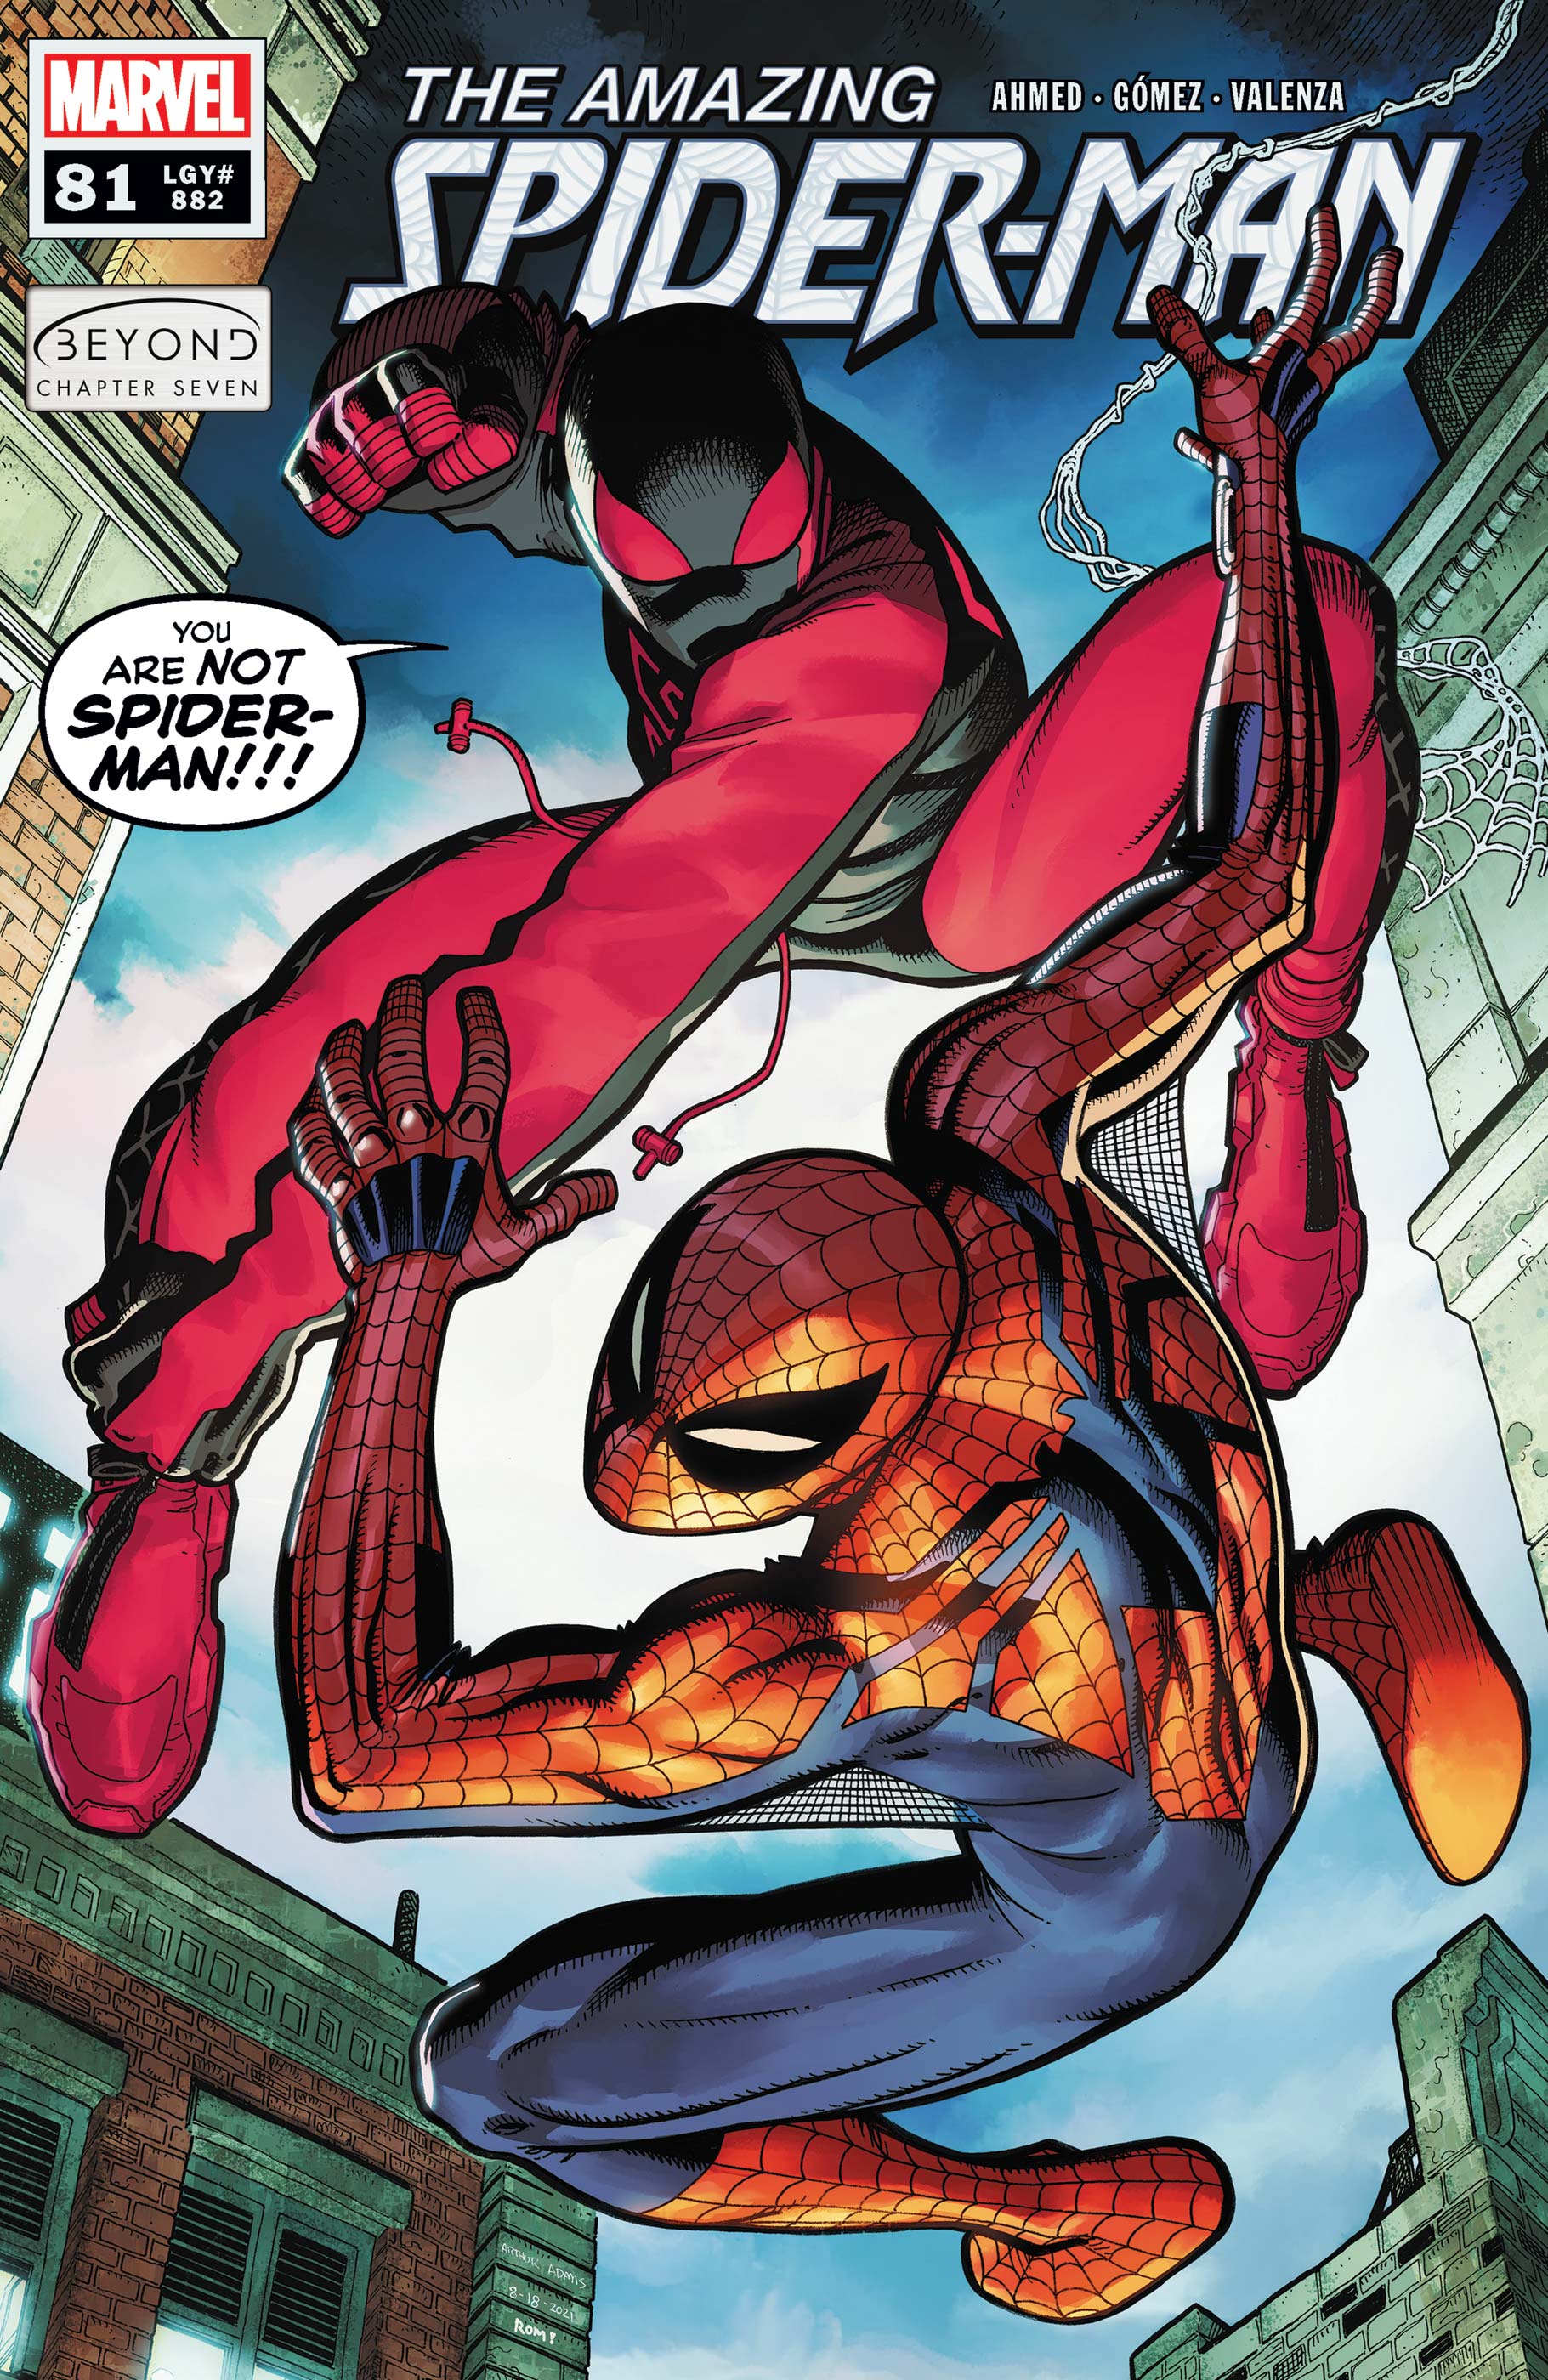 Amazing Spider-Man #81 Review